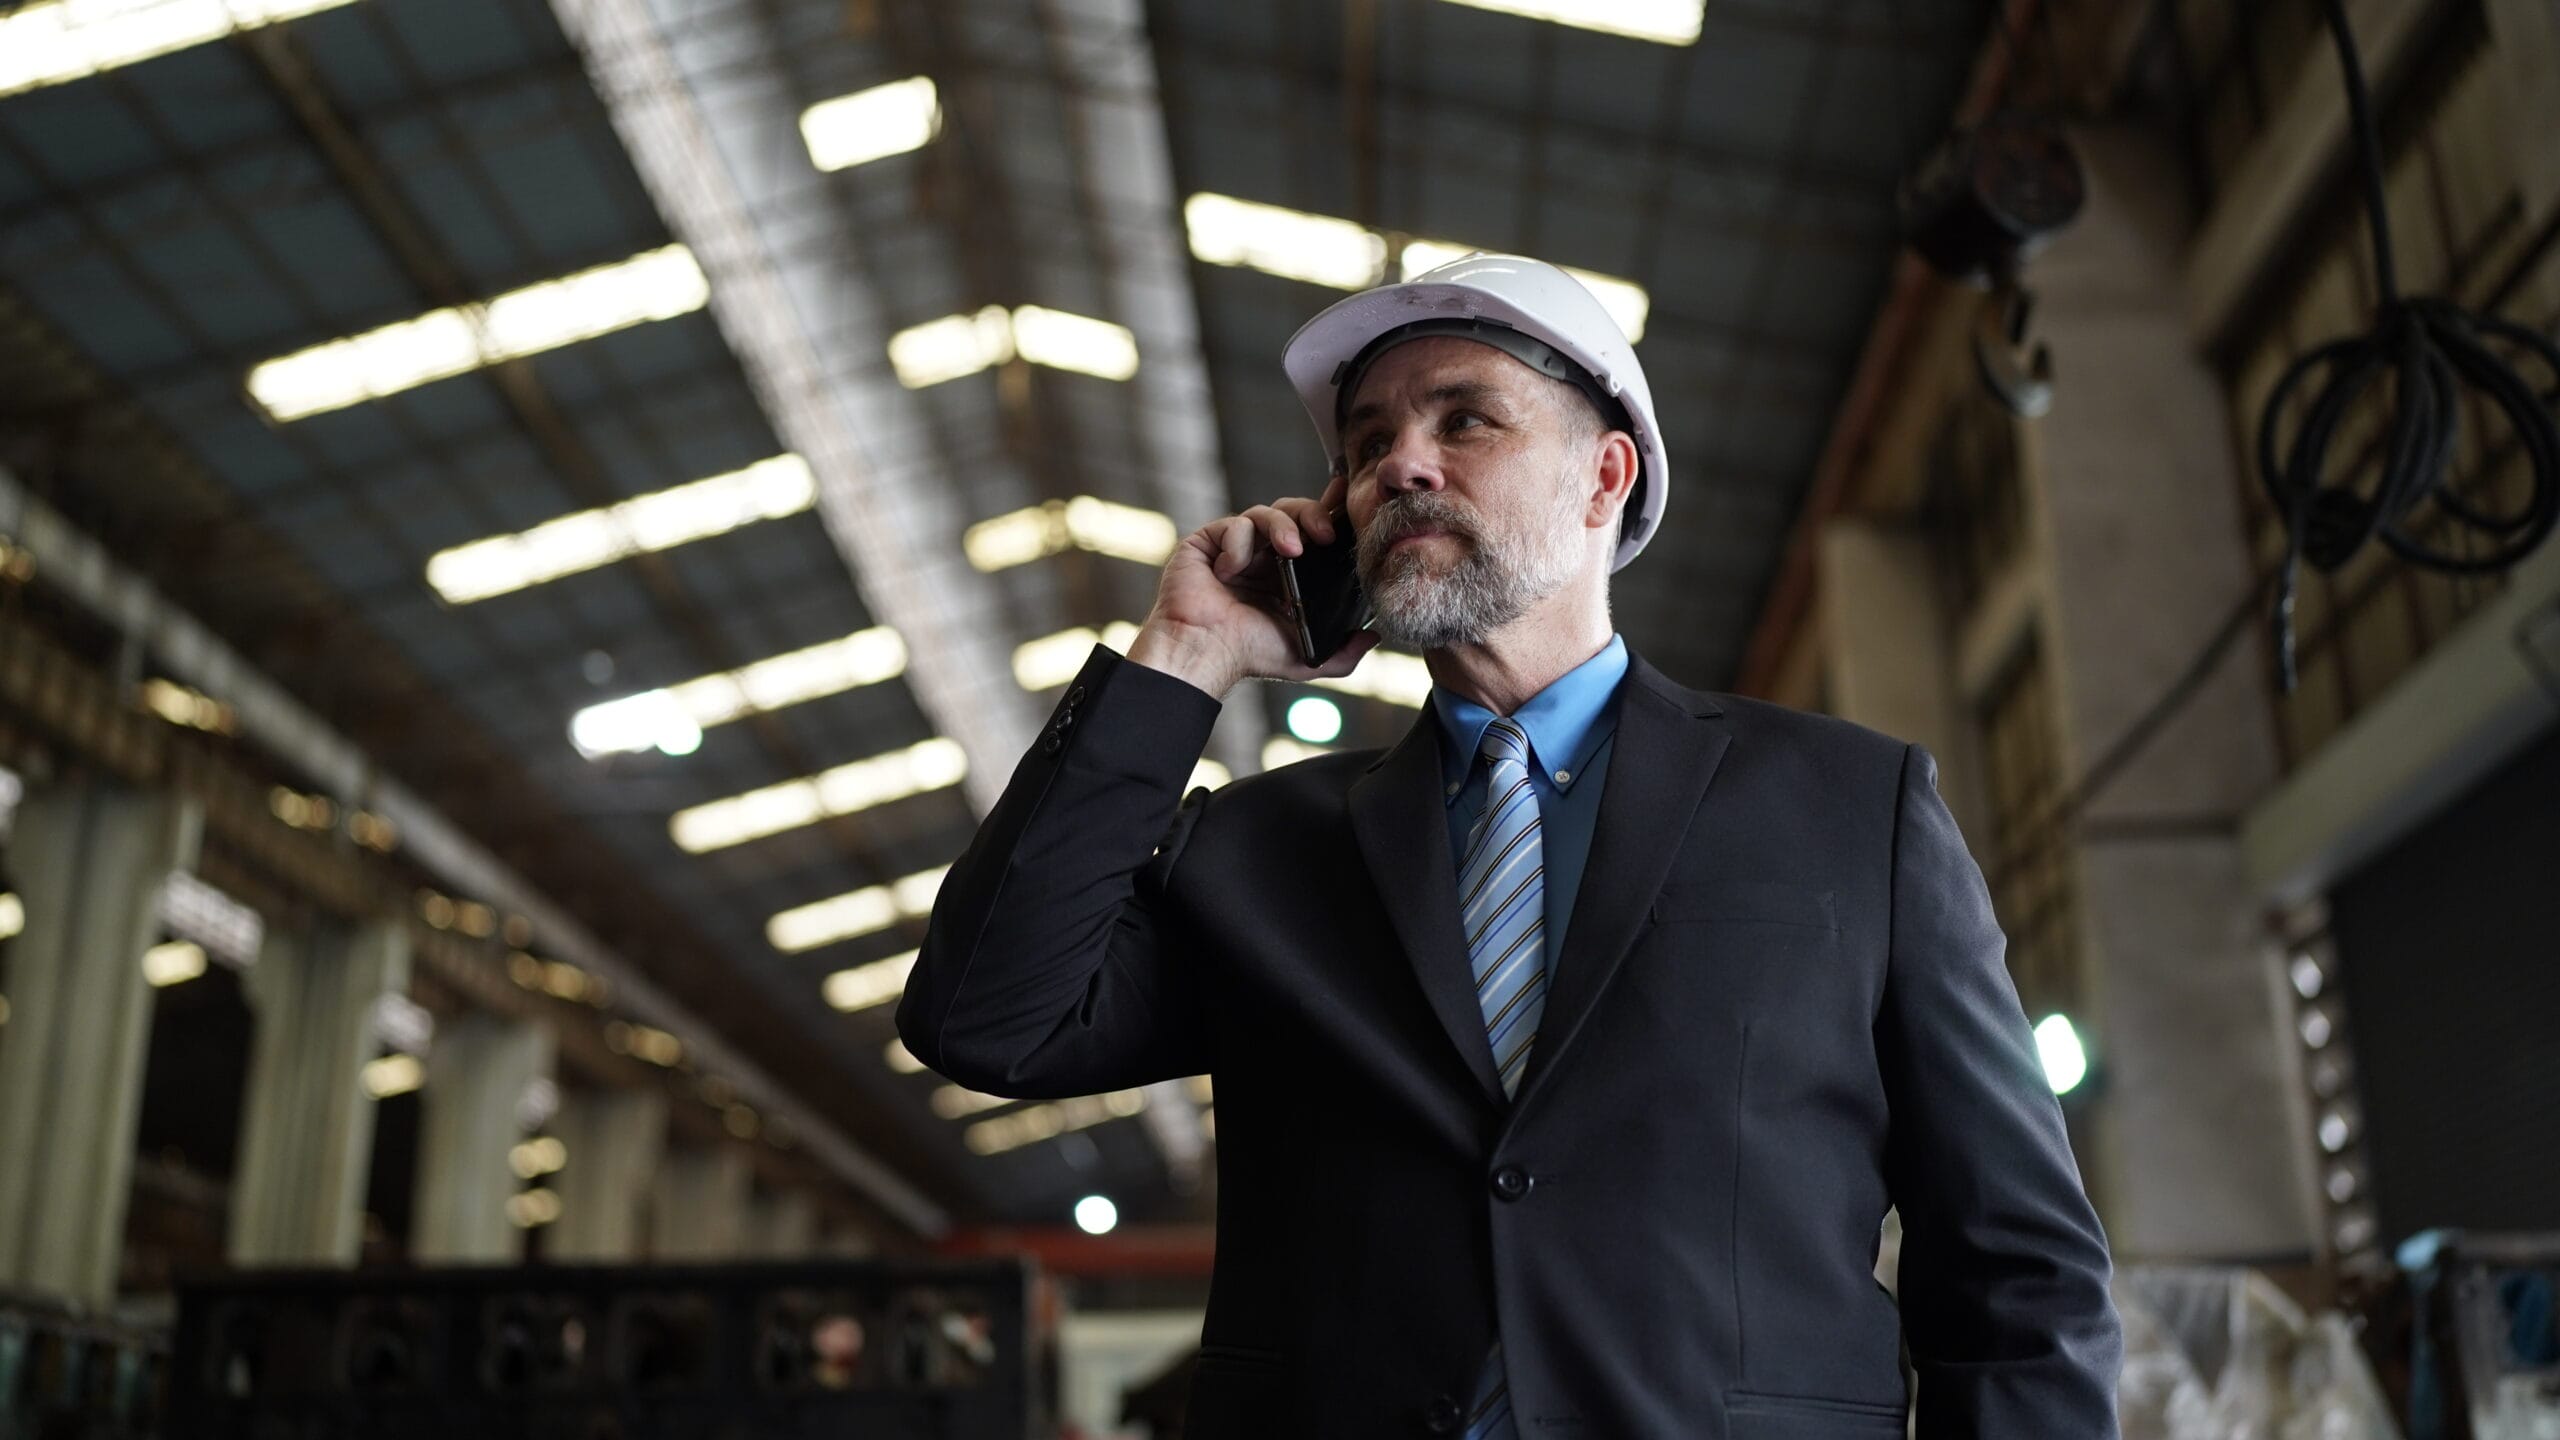 Businessman in factory warehouse talking on mobile, representing Ruby Receptionist's contractor answering service.